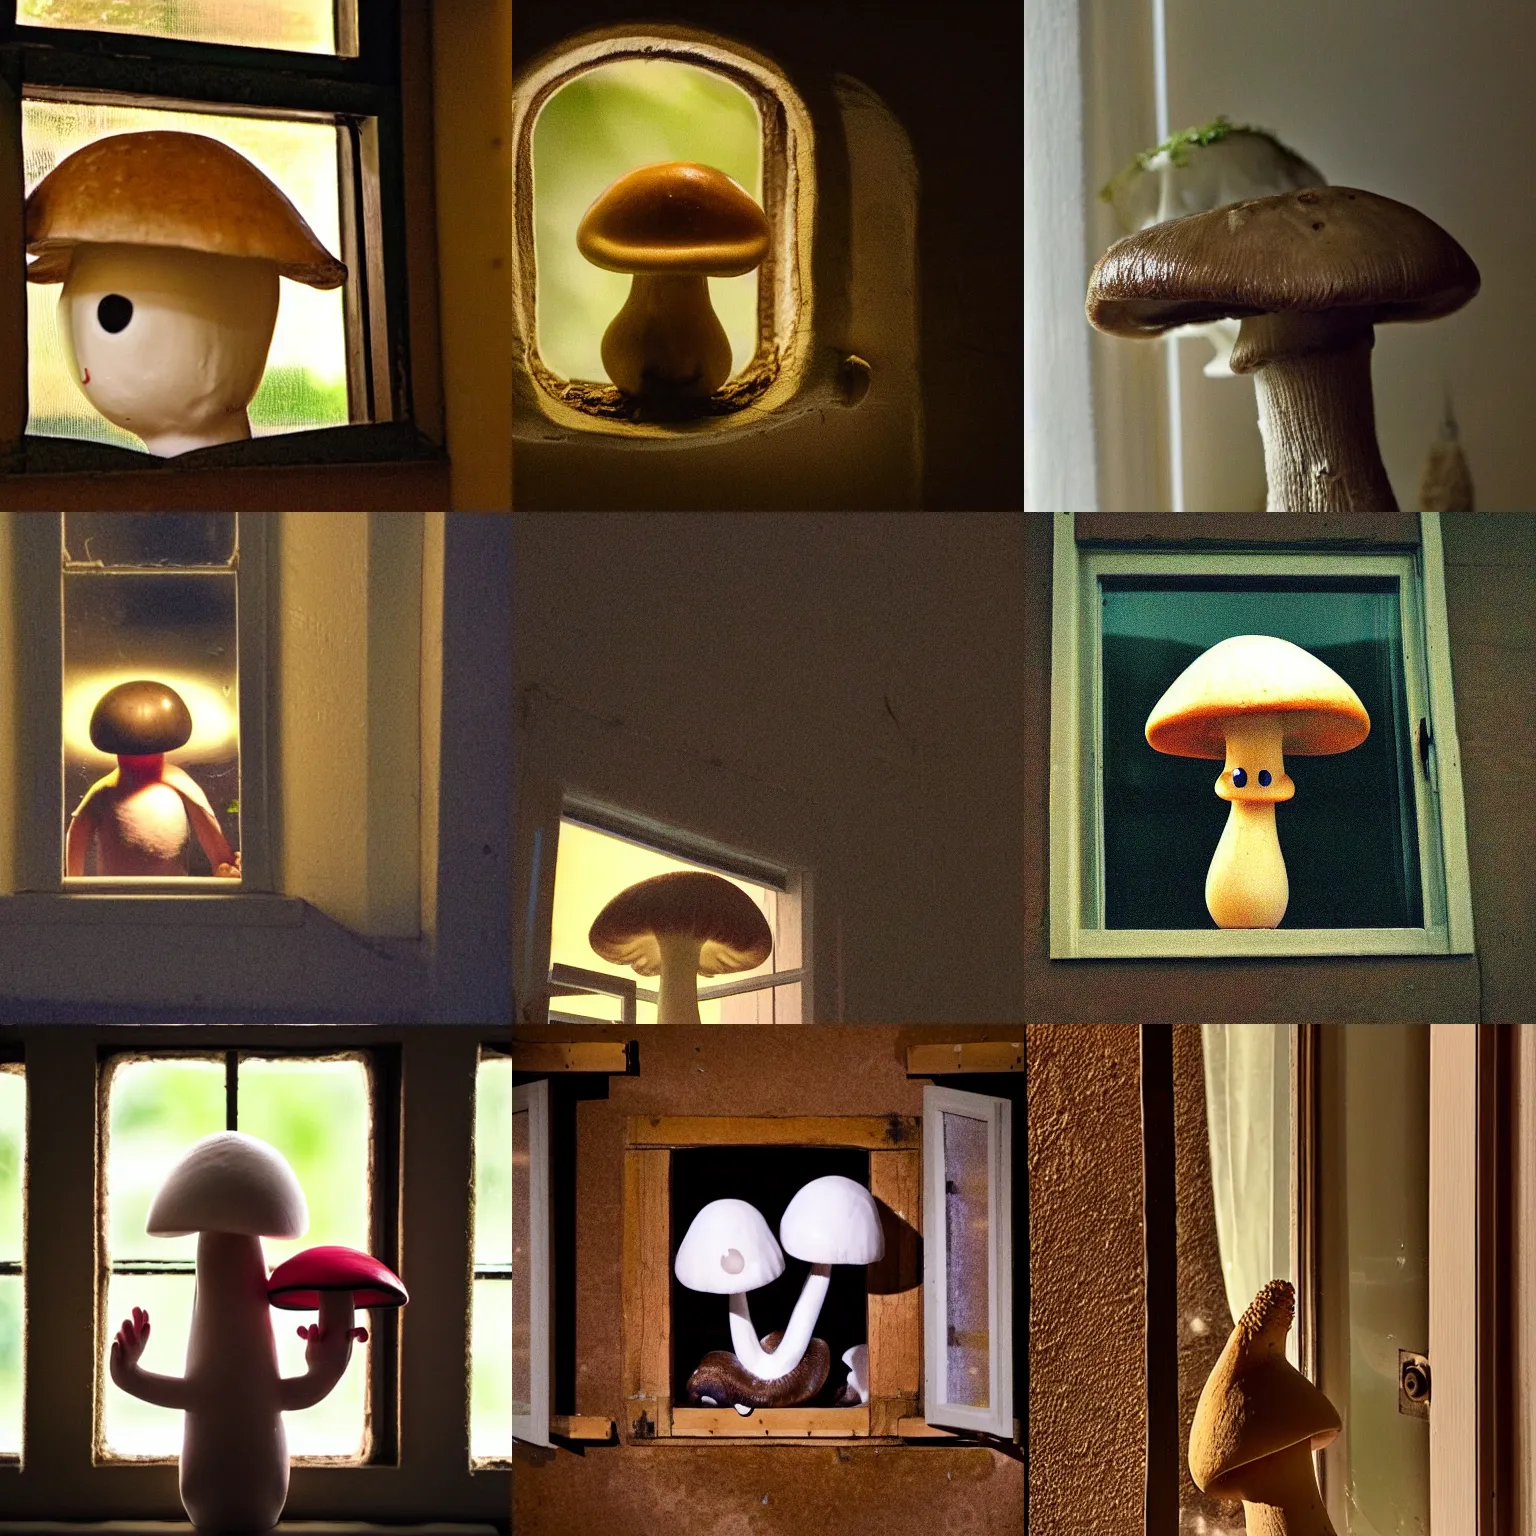 Prompt: mushroom man outside the window at night peering in. mushroom with eyes standing outside the kitchen window